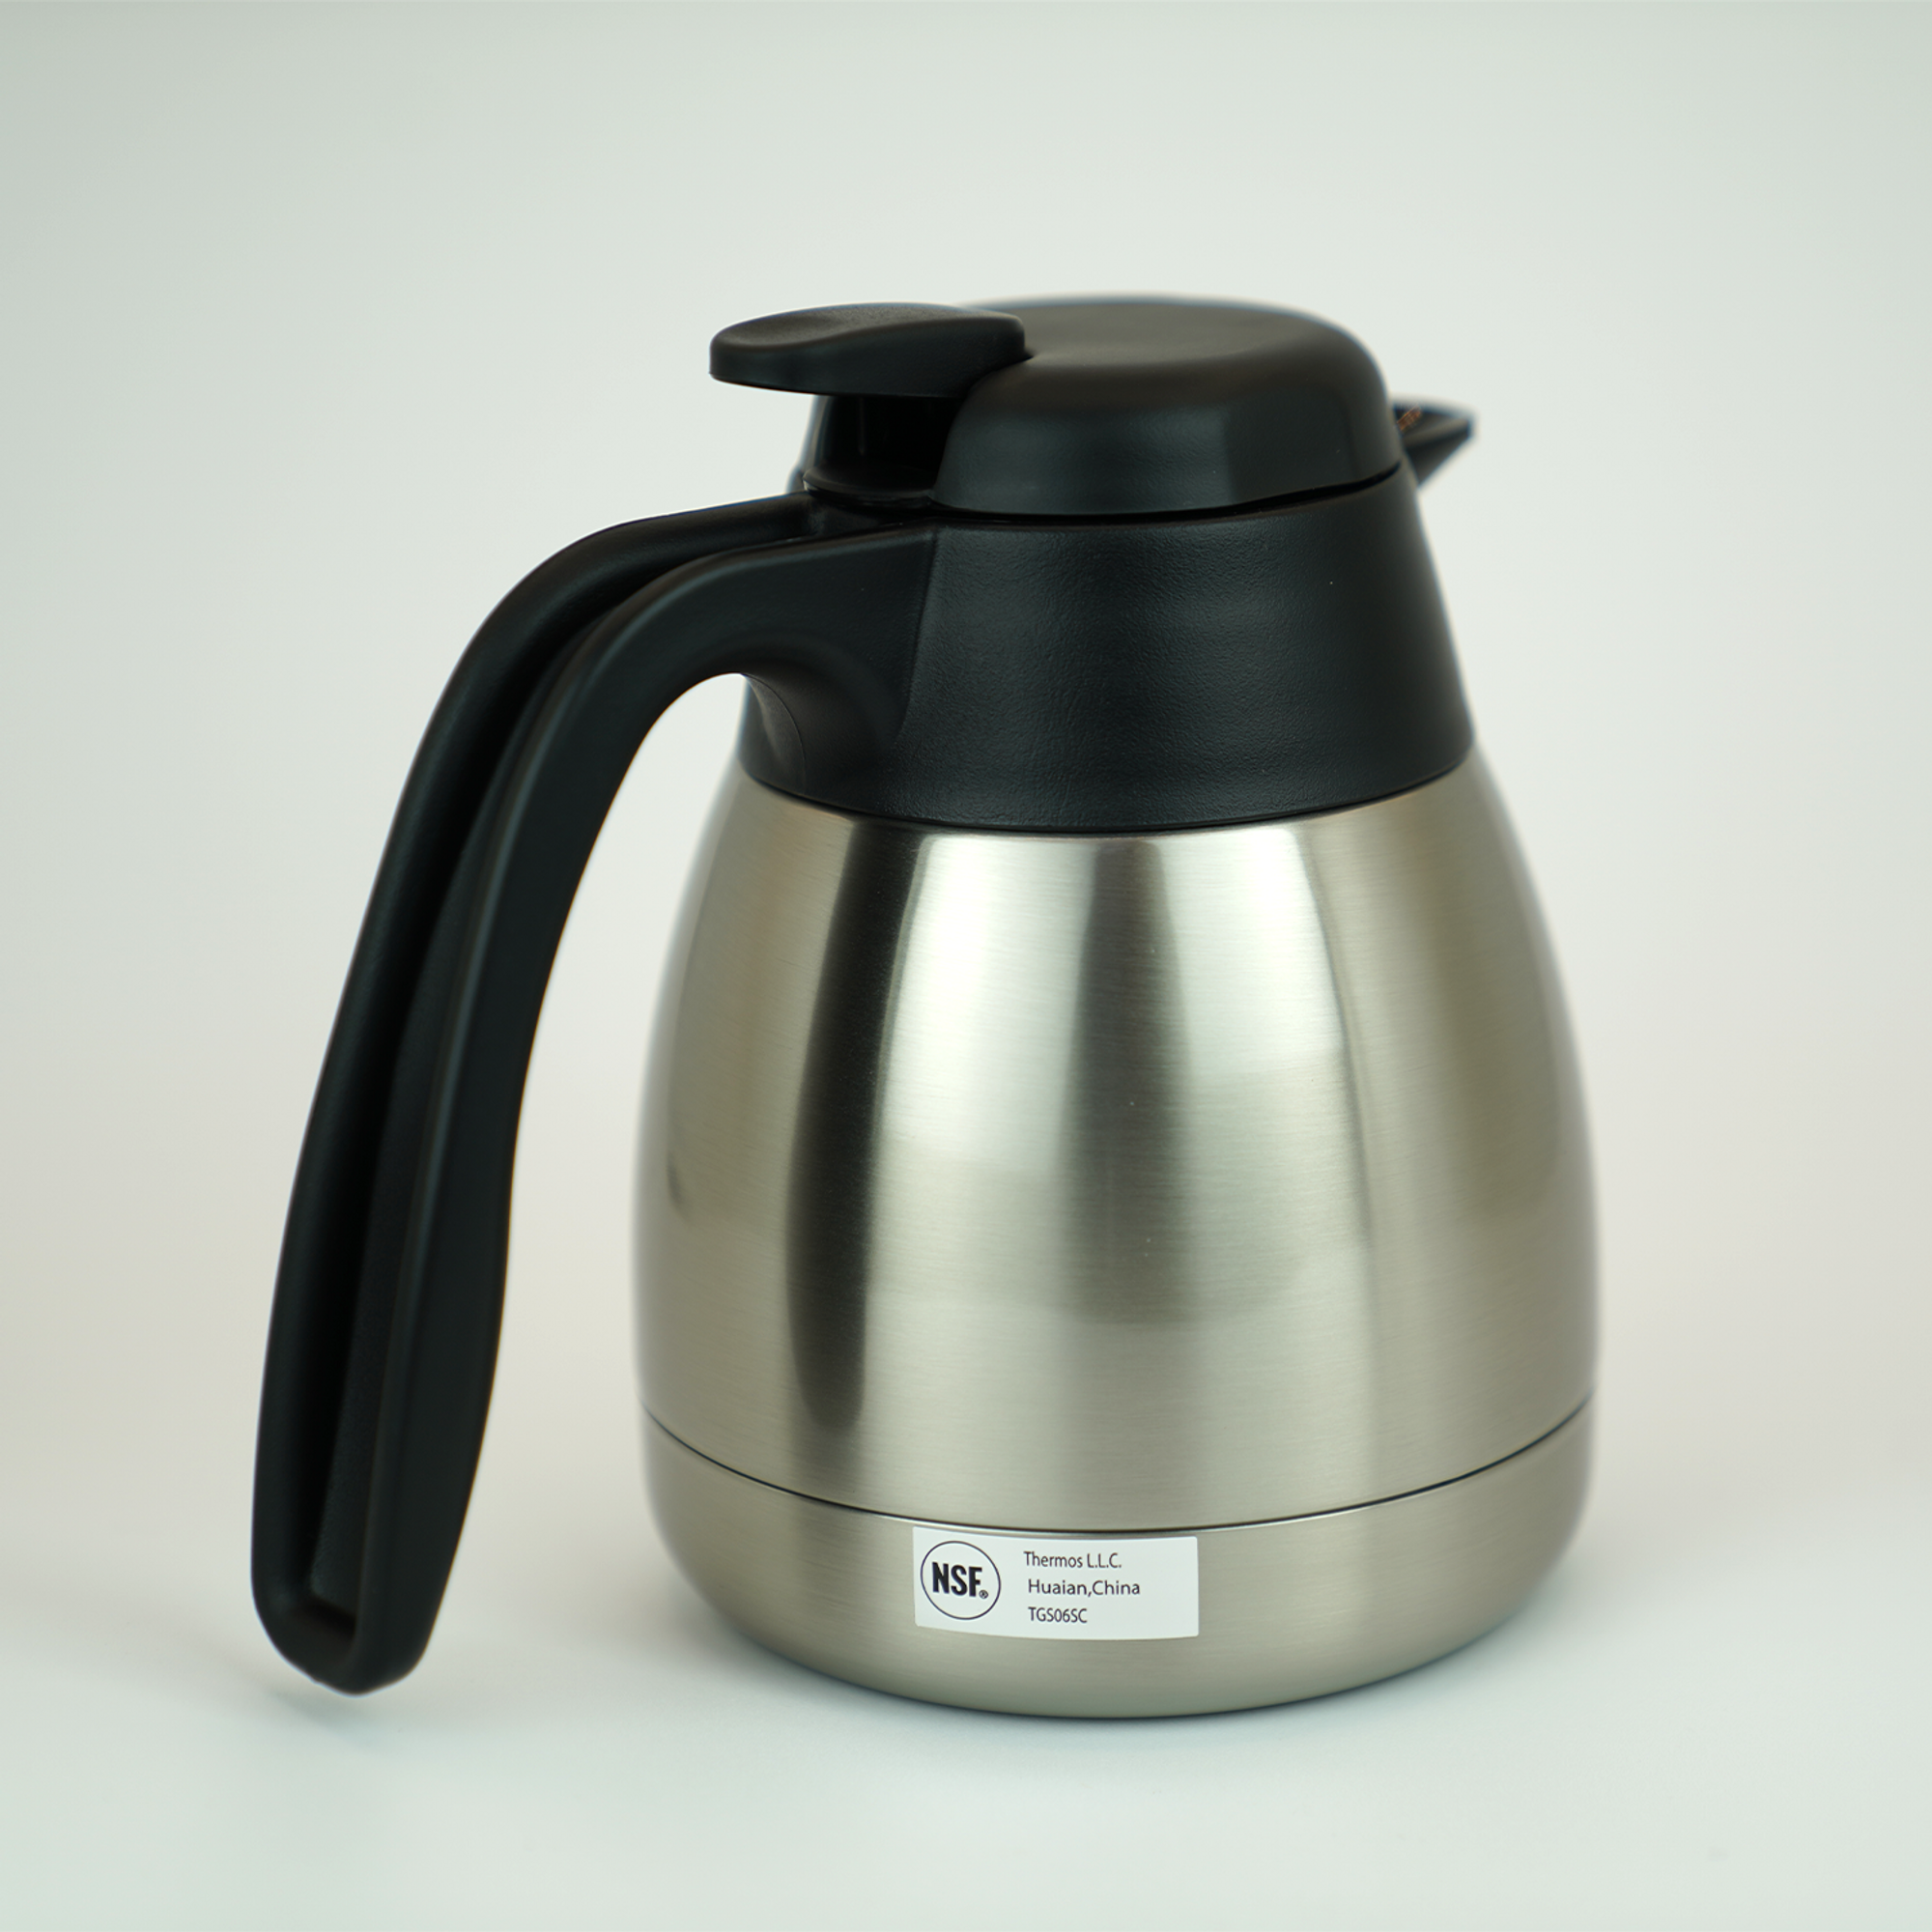 Thermos 0.6L Stainless Steel Carafe